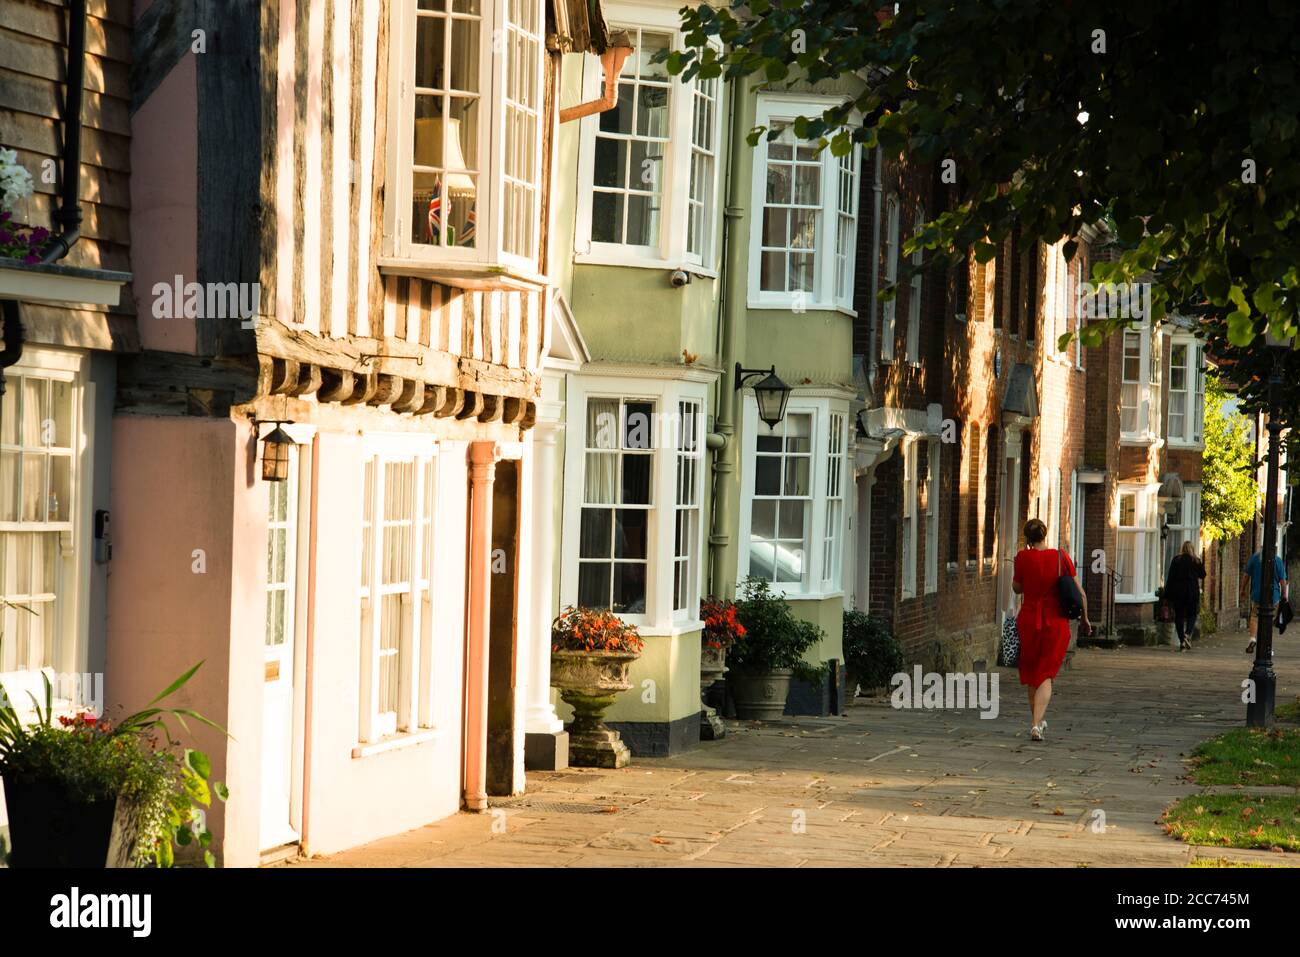 A summer evening on the Causeway, Horsham, West Sussex, England, UK Stock Photo